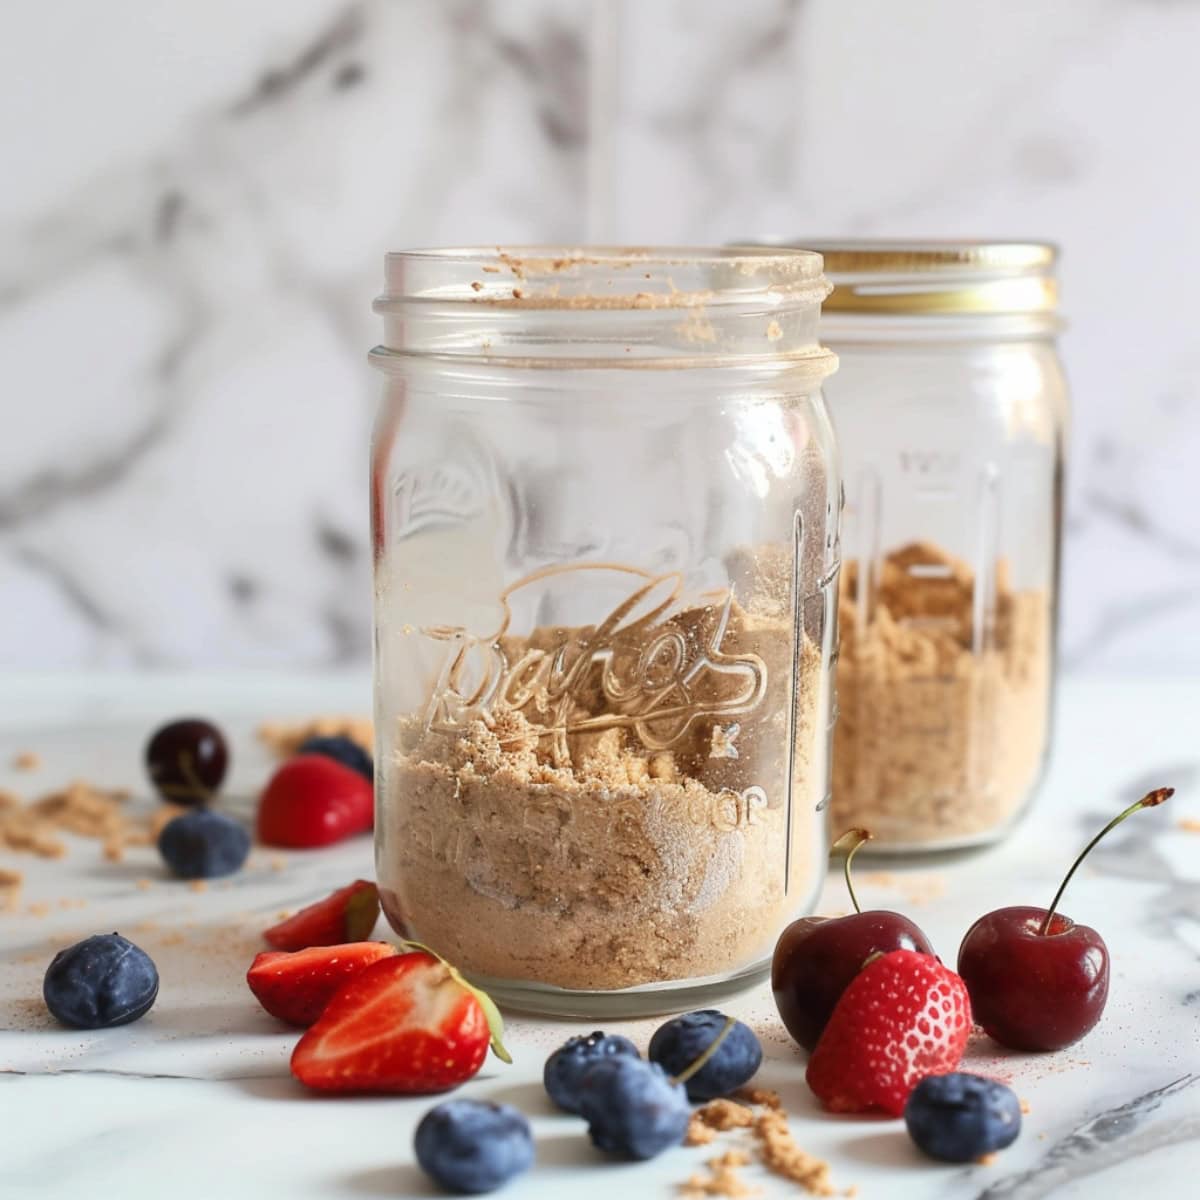 Two jars with crushed grahams and fresh berries on top of marble countertop.